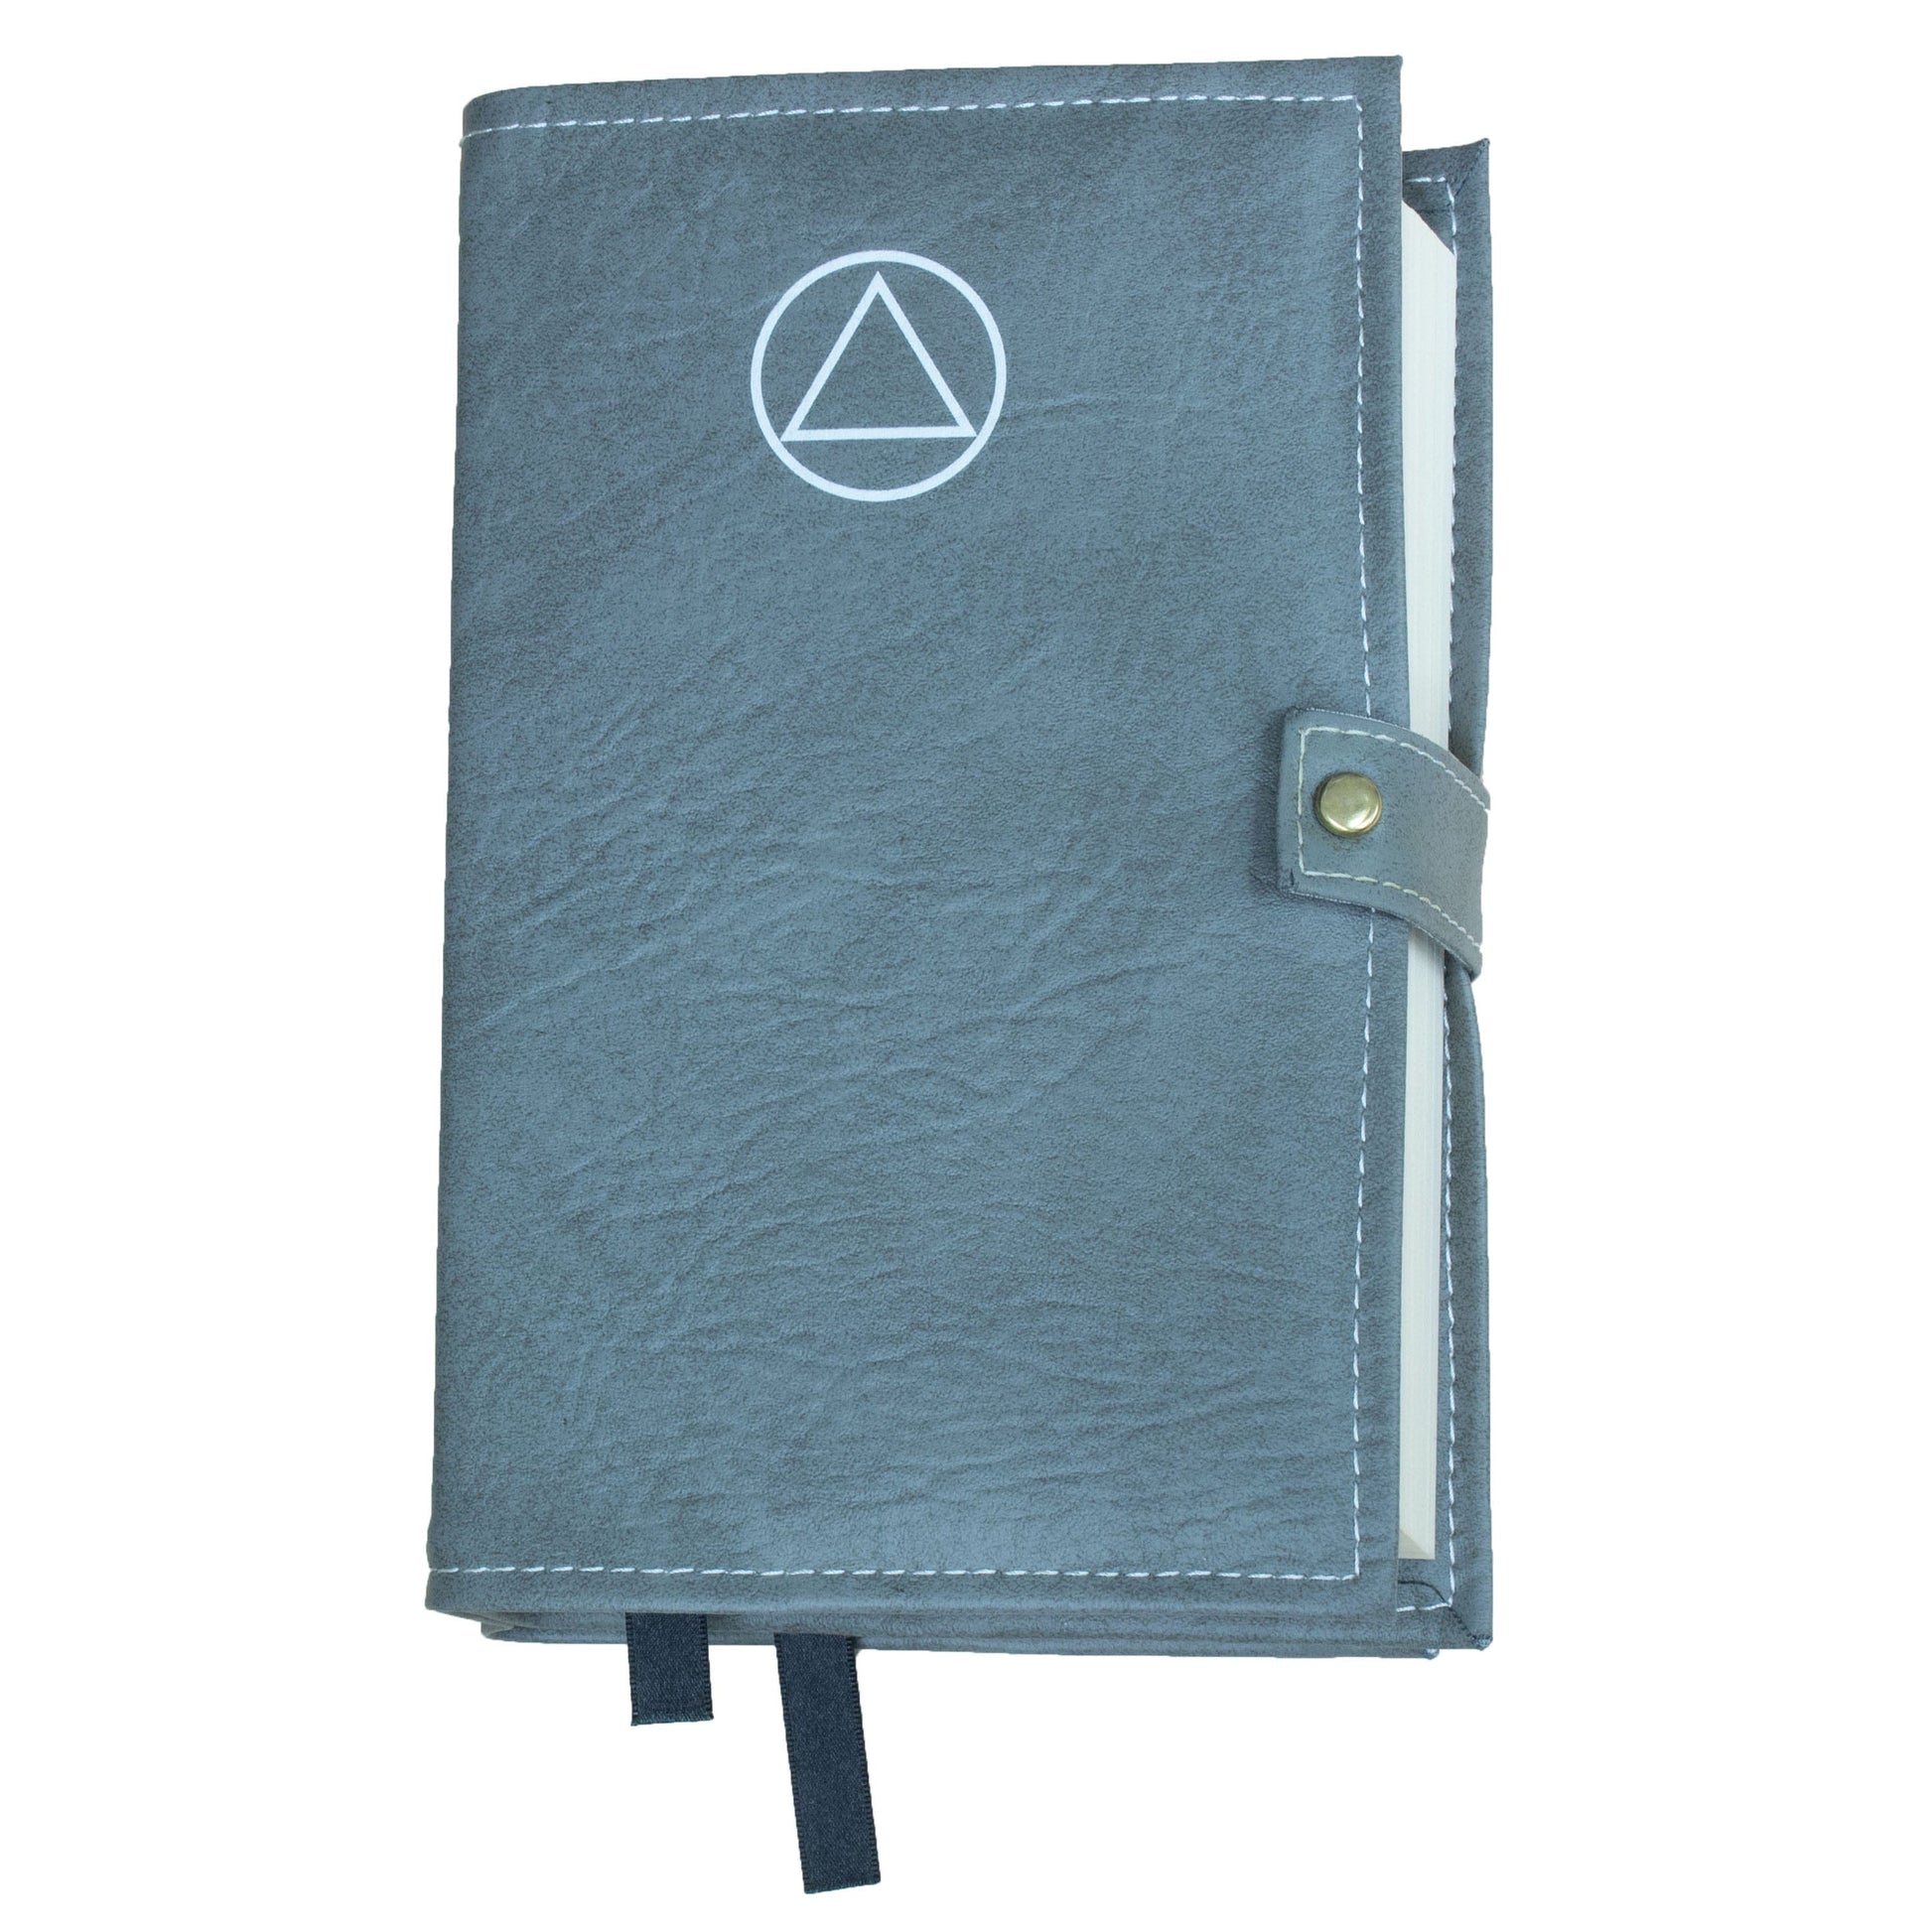 AA Gray Double Book Cover With AA Symbol For Hardcover Books